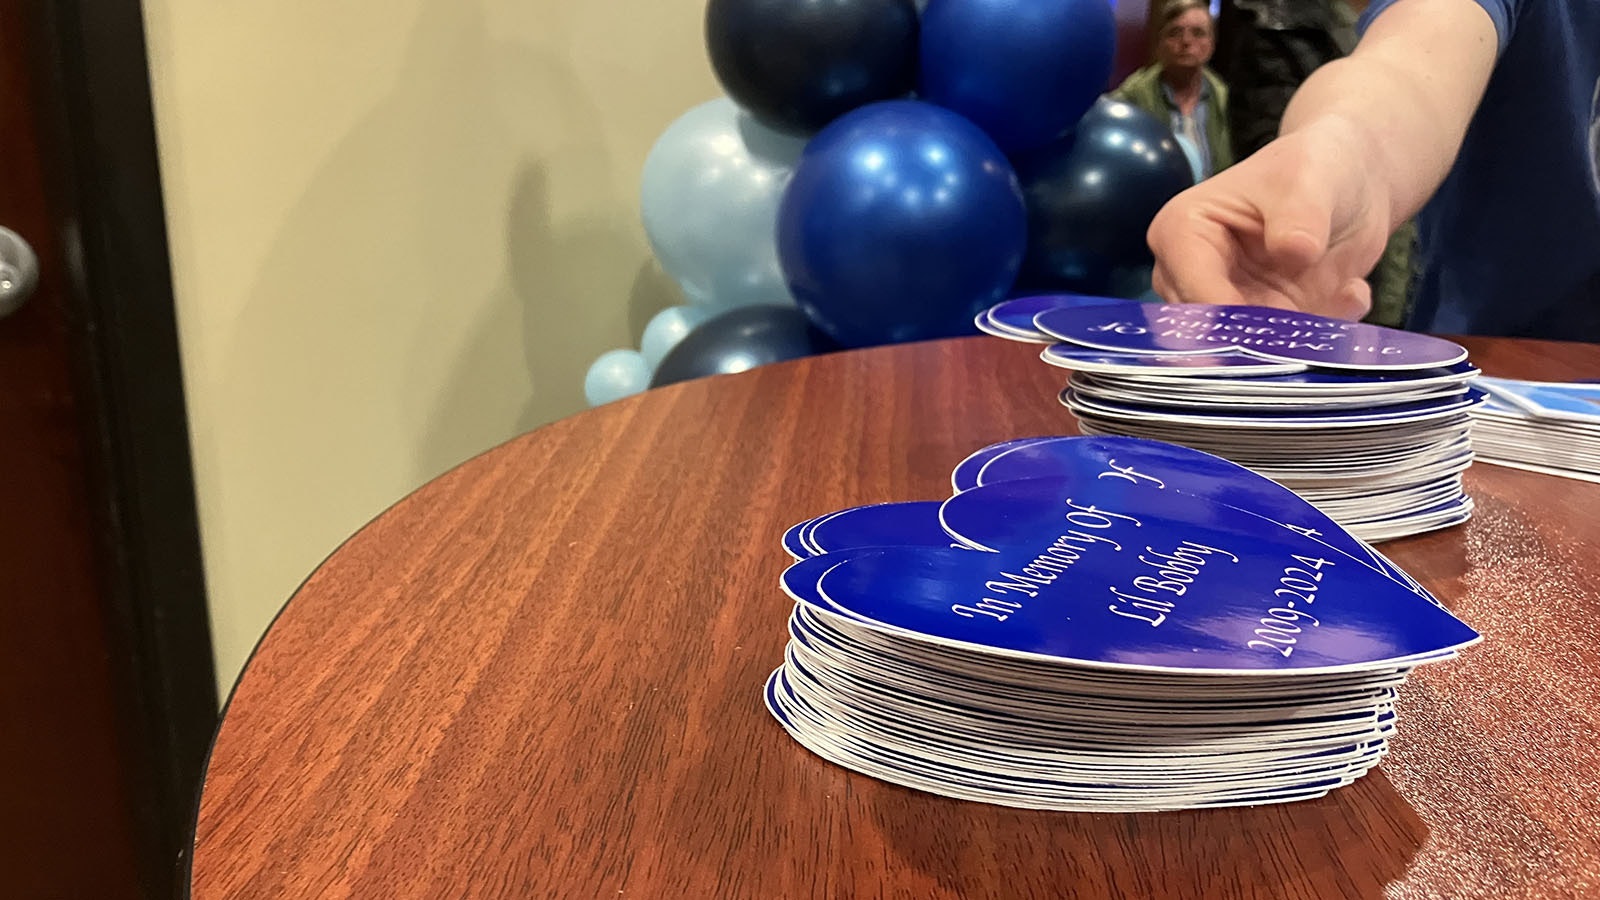 Blue Heart stickers that read “In Memory Of Lil Bobby” were offered to everyone who attended his funeral service.